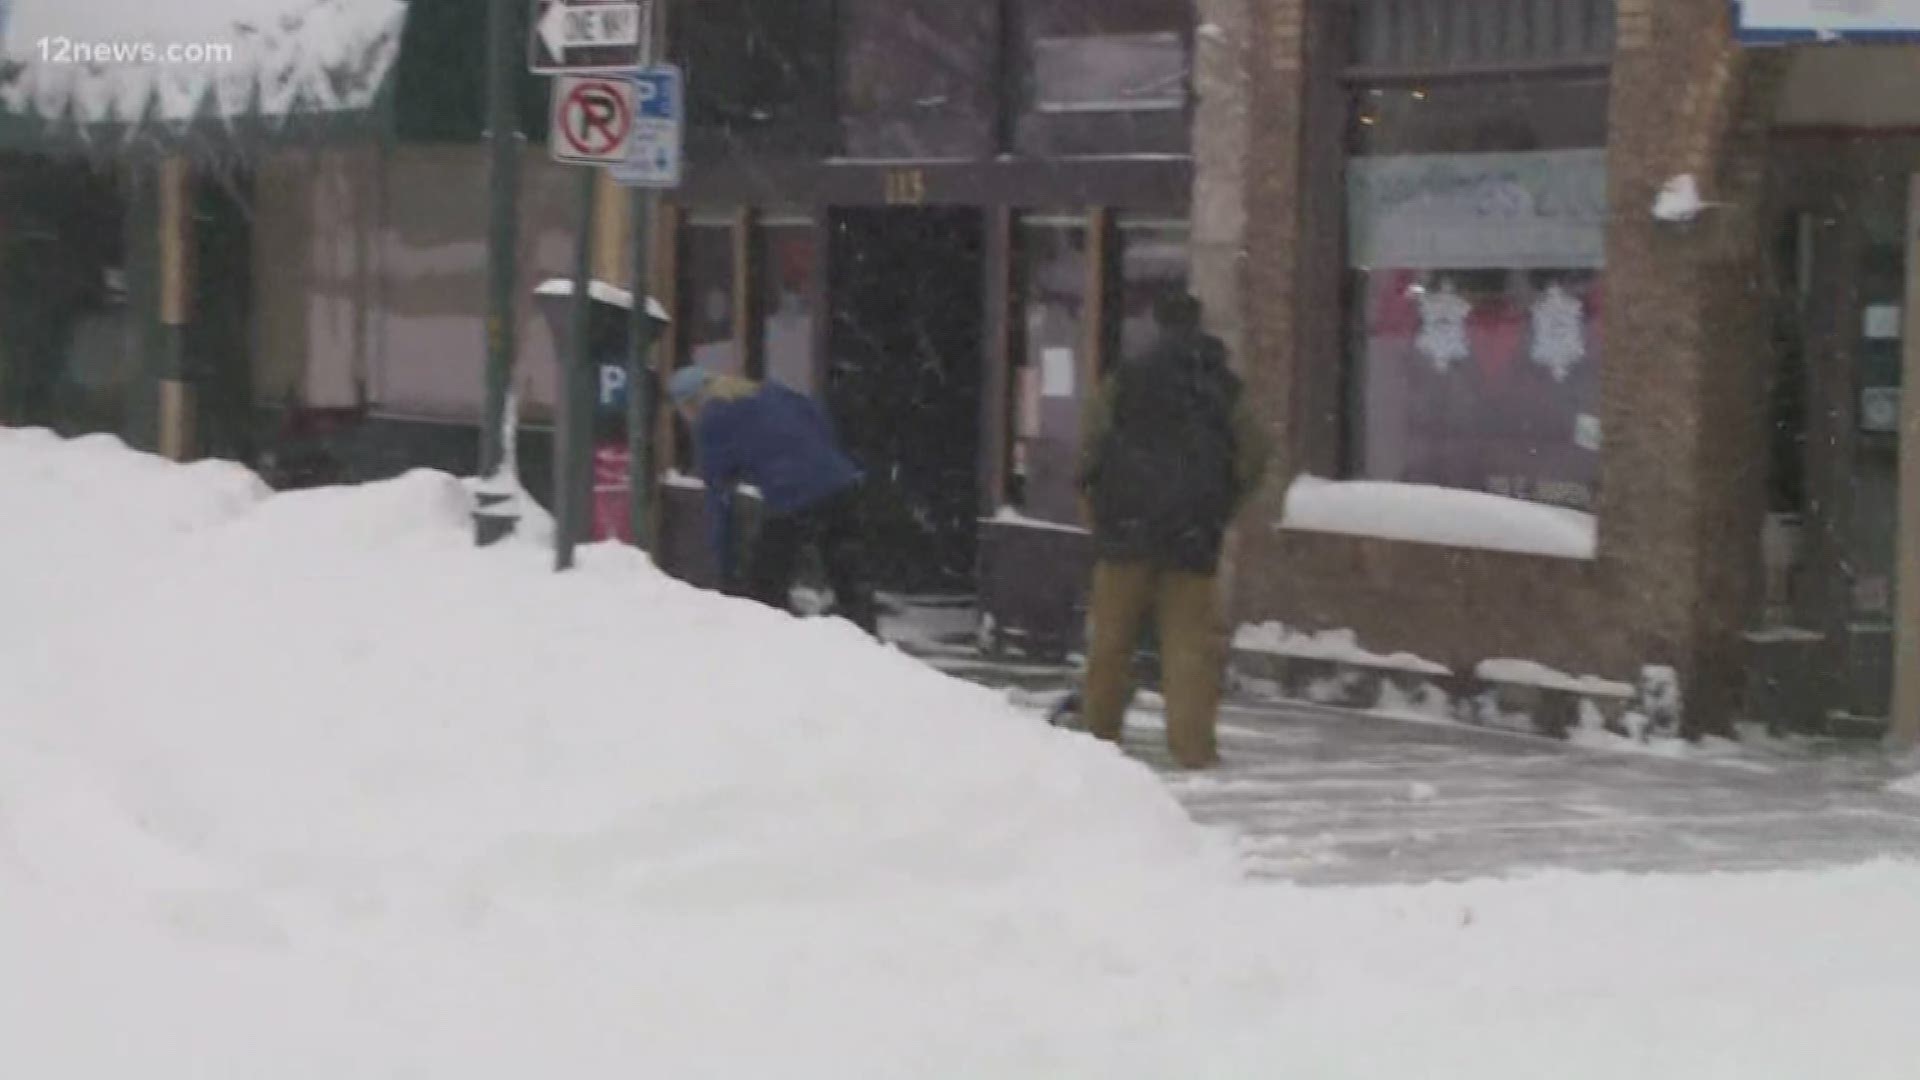 Flagstaff is getting hit with a record amount of snow, and it is keeping people indoors. Well, most people. We caught up with one guy who was walking around in a t-shirt.